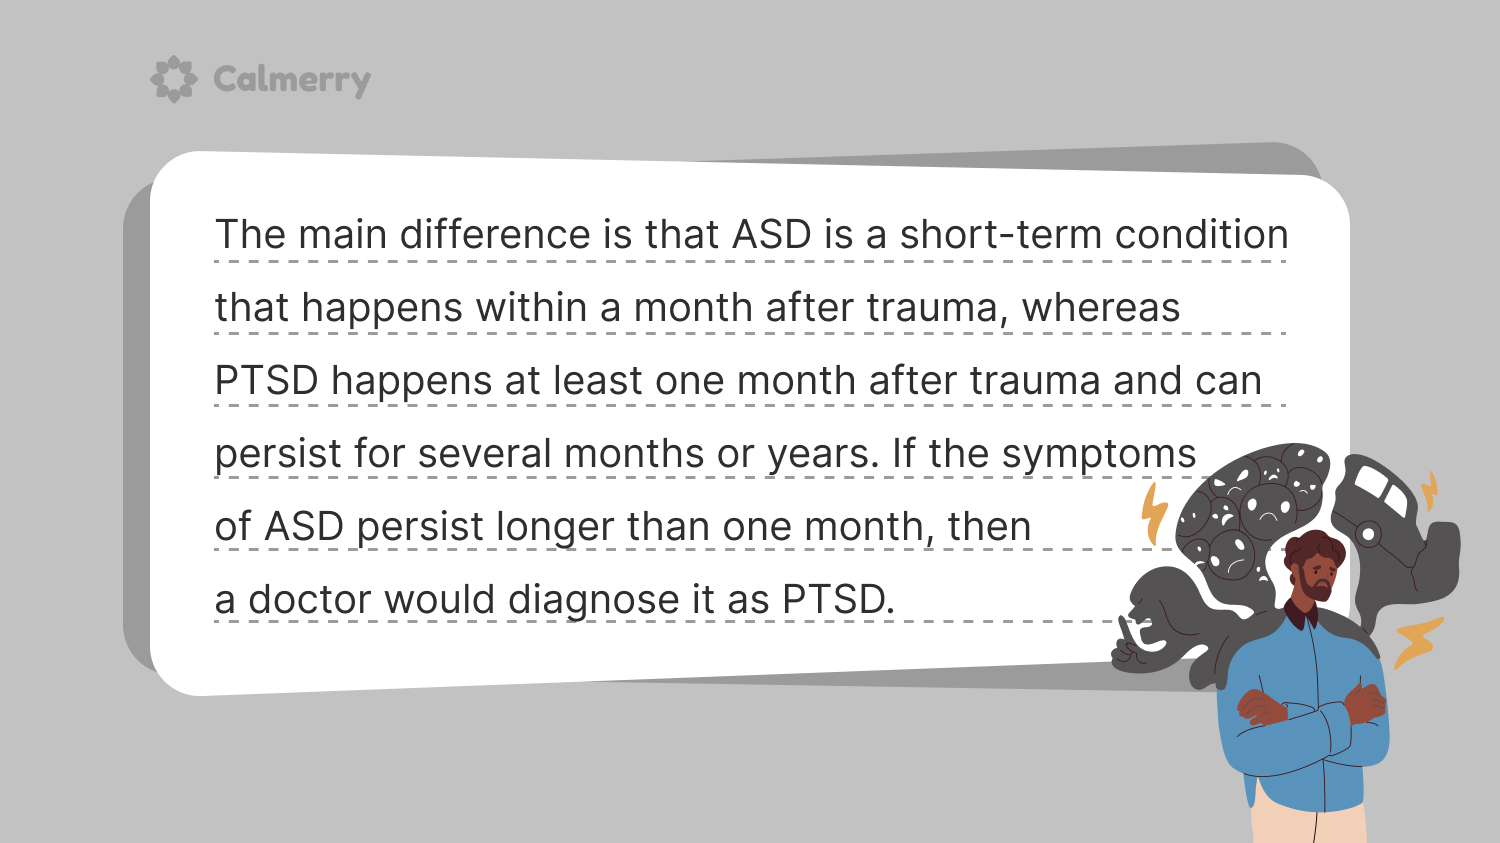 ASD and PTSD have closely linked conditions, but there are particular differences between them